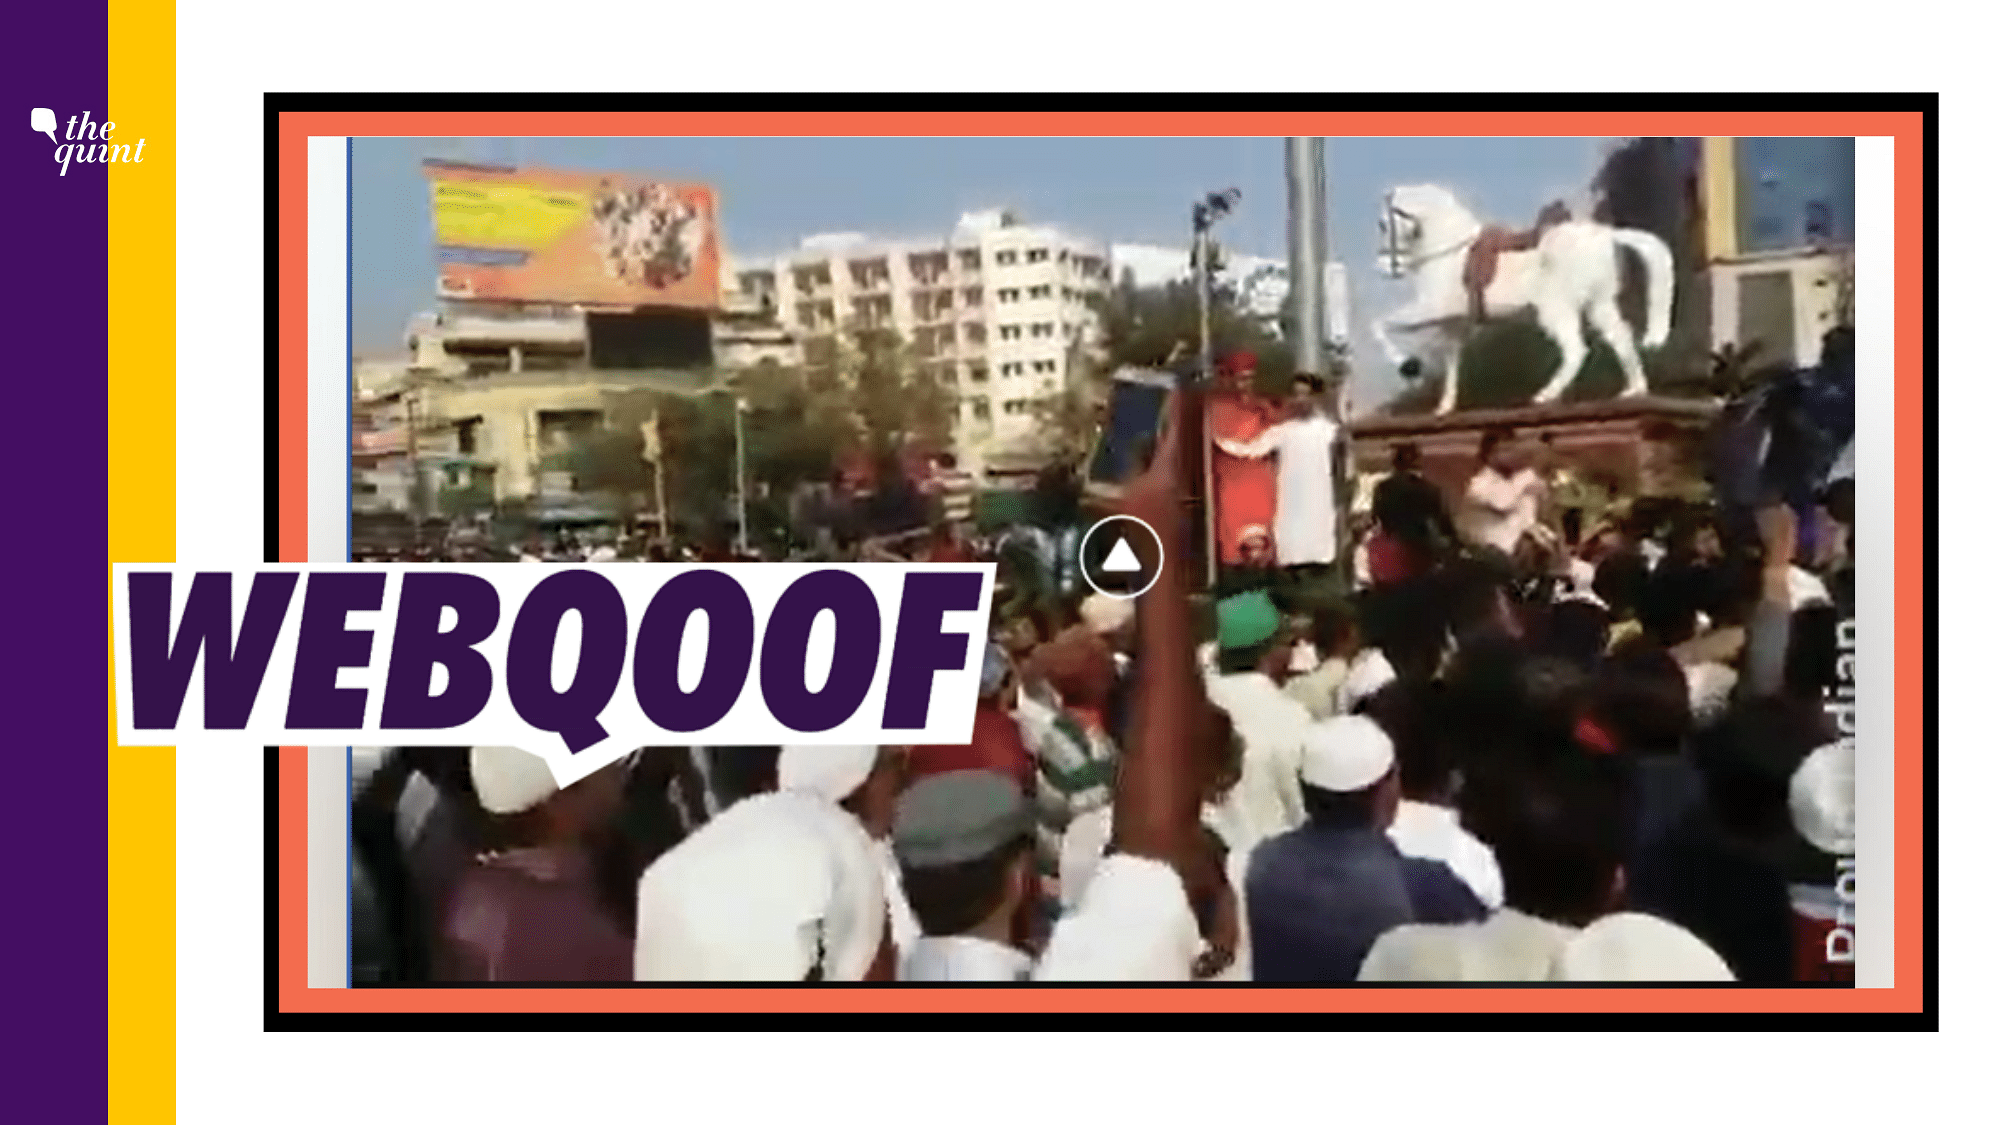 An old video from 2017 is being circulated with a claim that Muslim goons are chanting “Islamic supremacy” slogans.